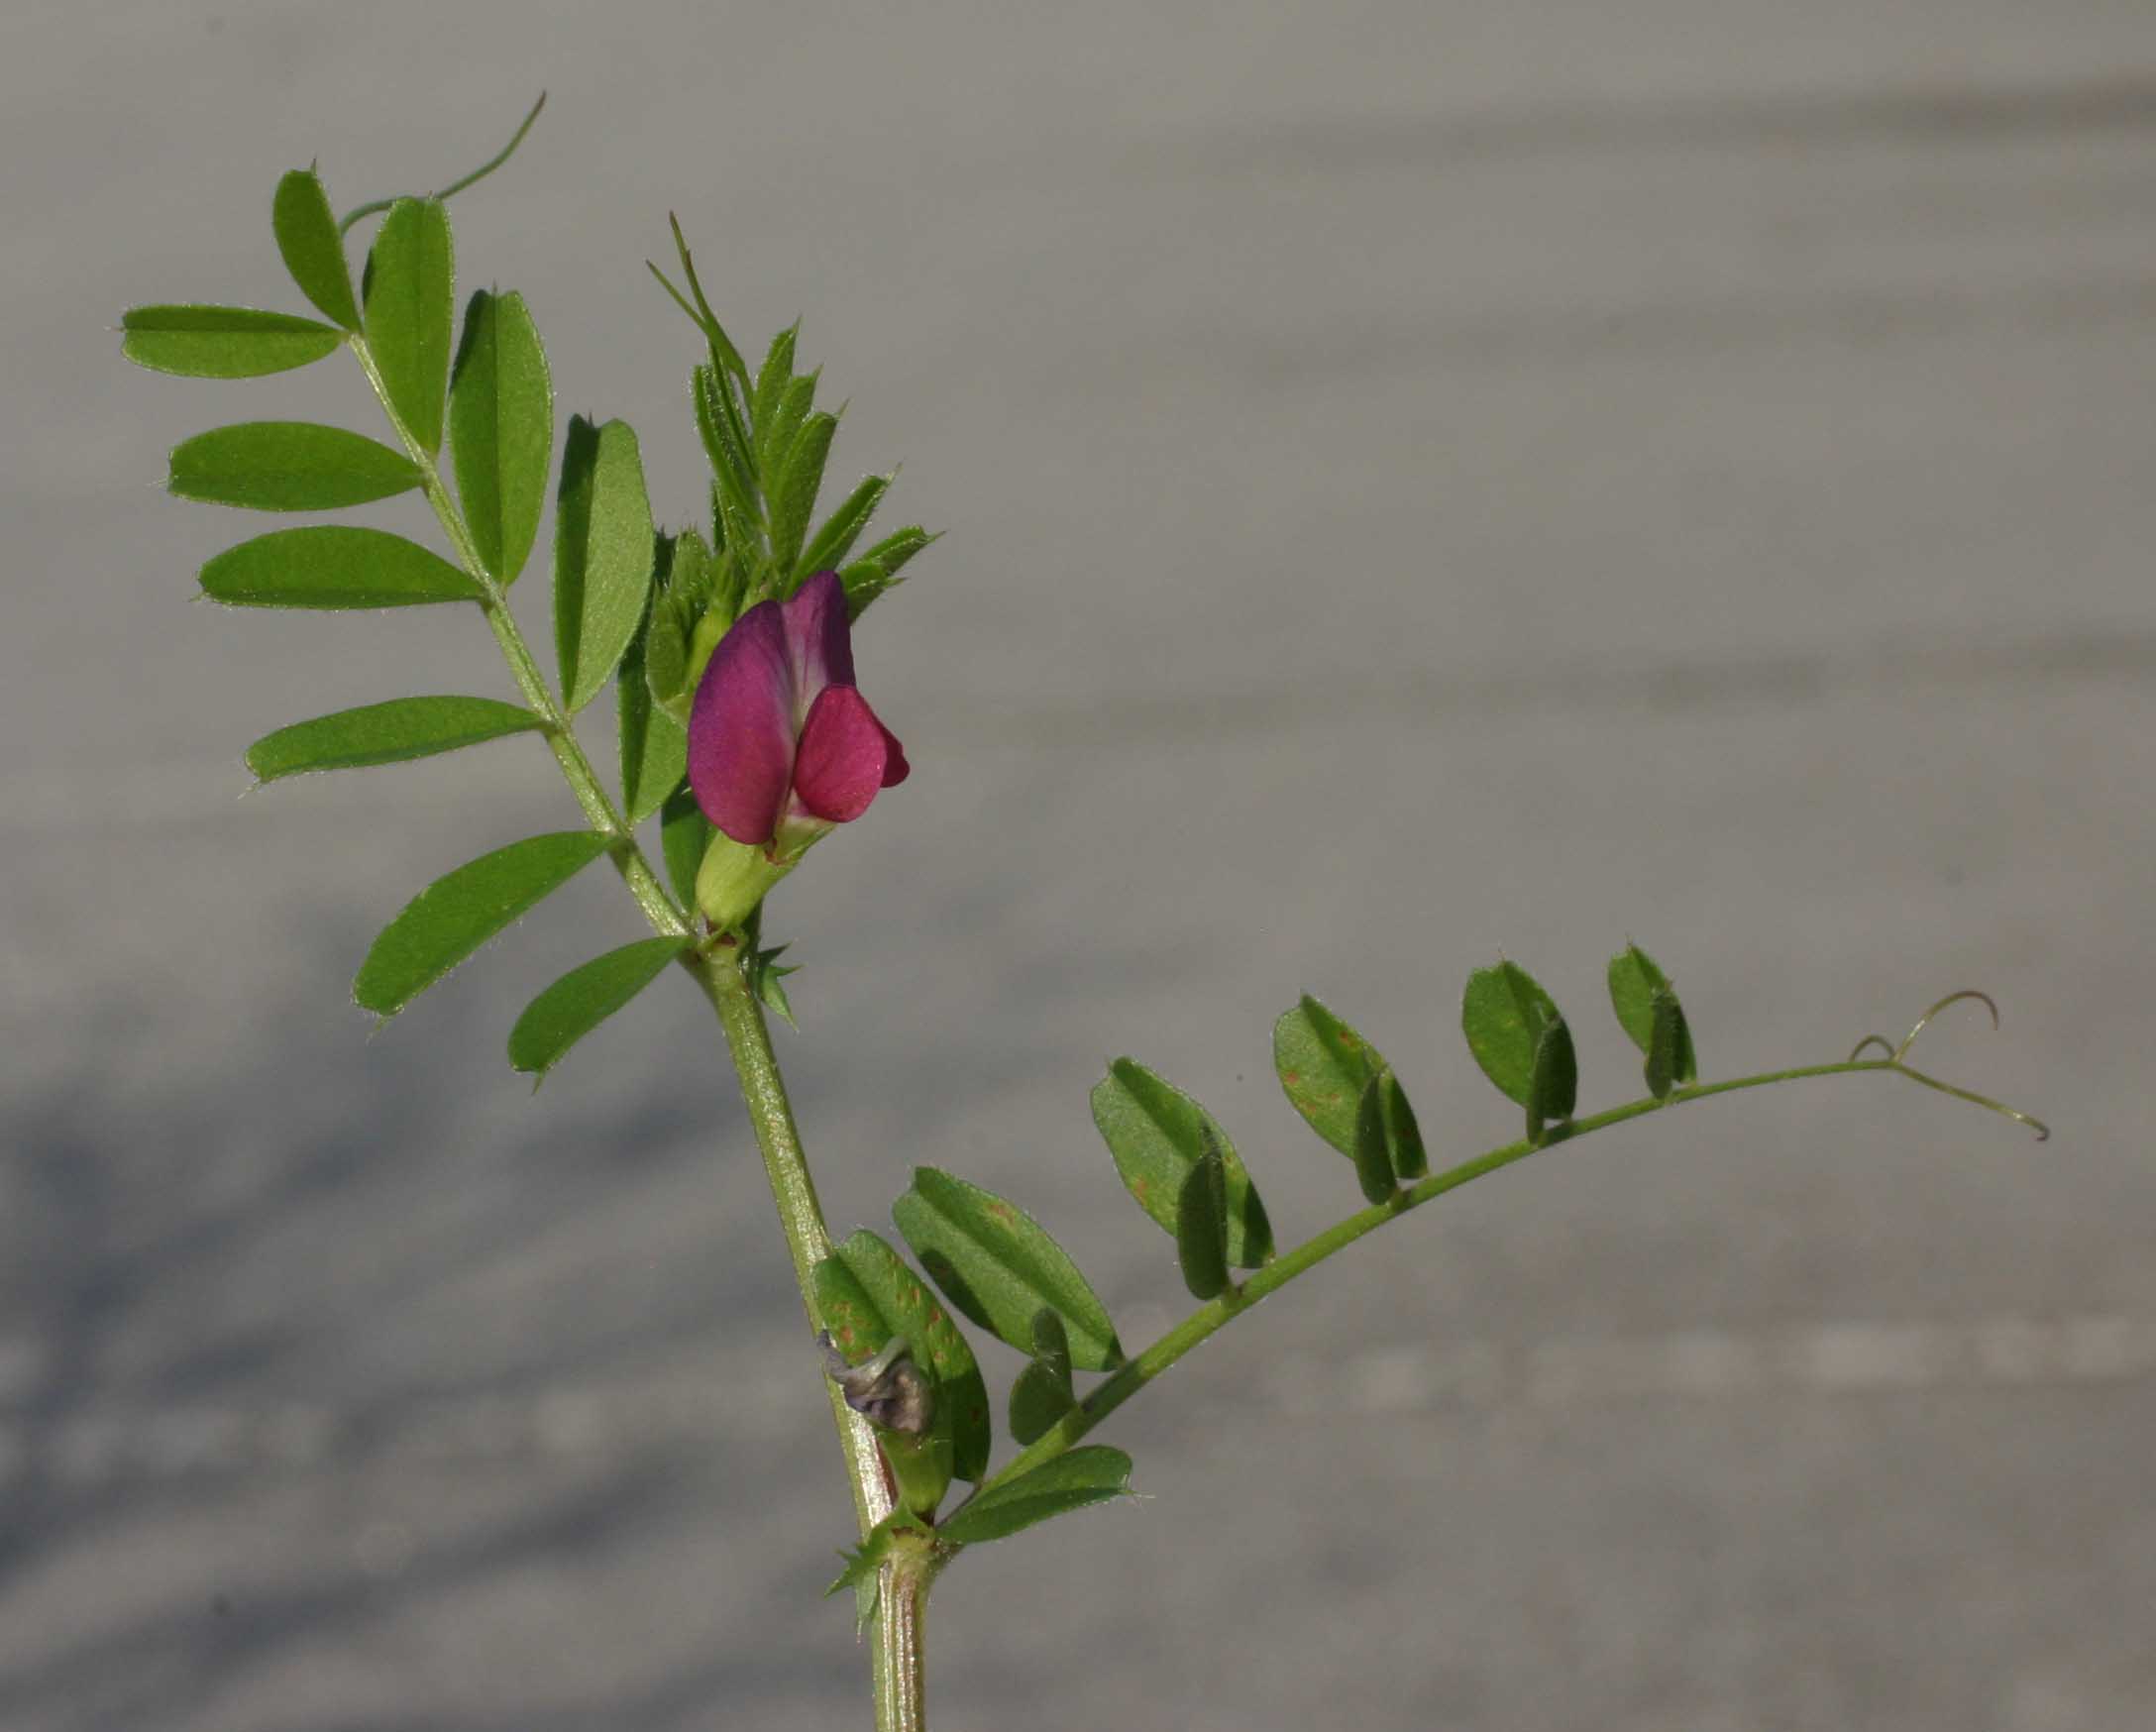 vetch branch with pinnately compound leaves, tendrils on the tips, andflowers in the leaf axils